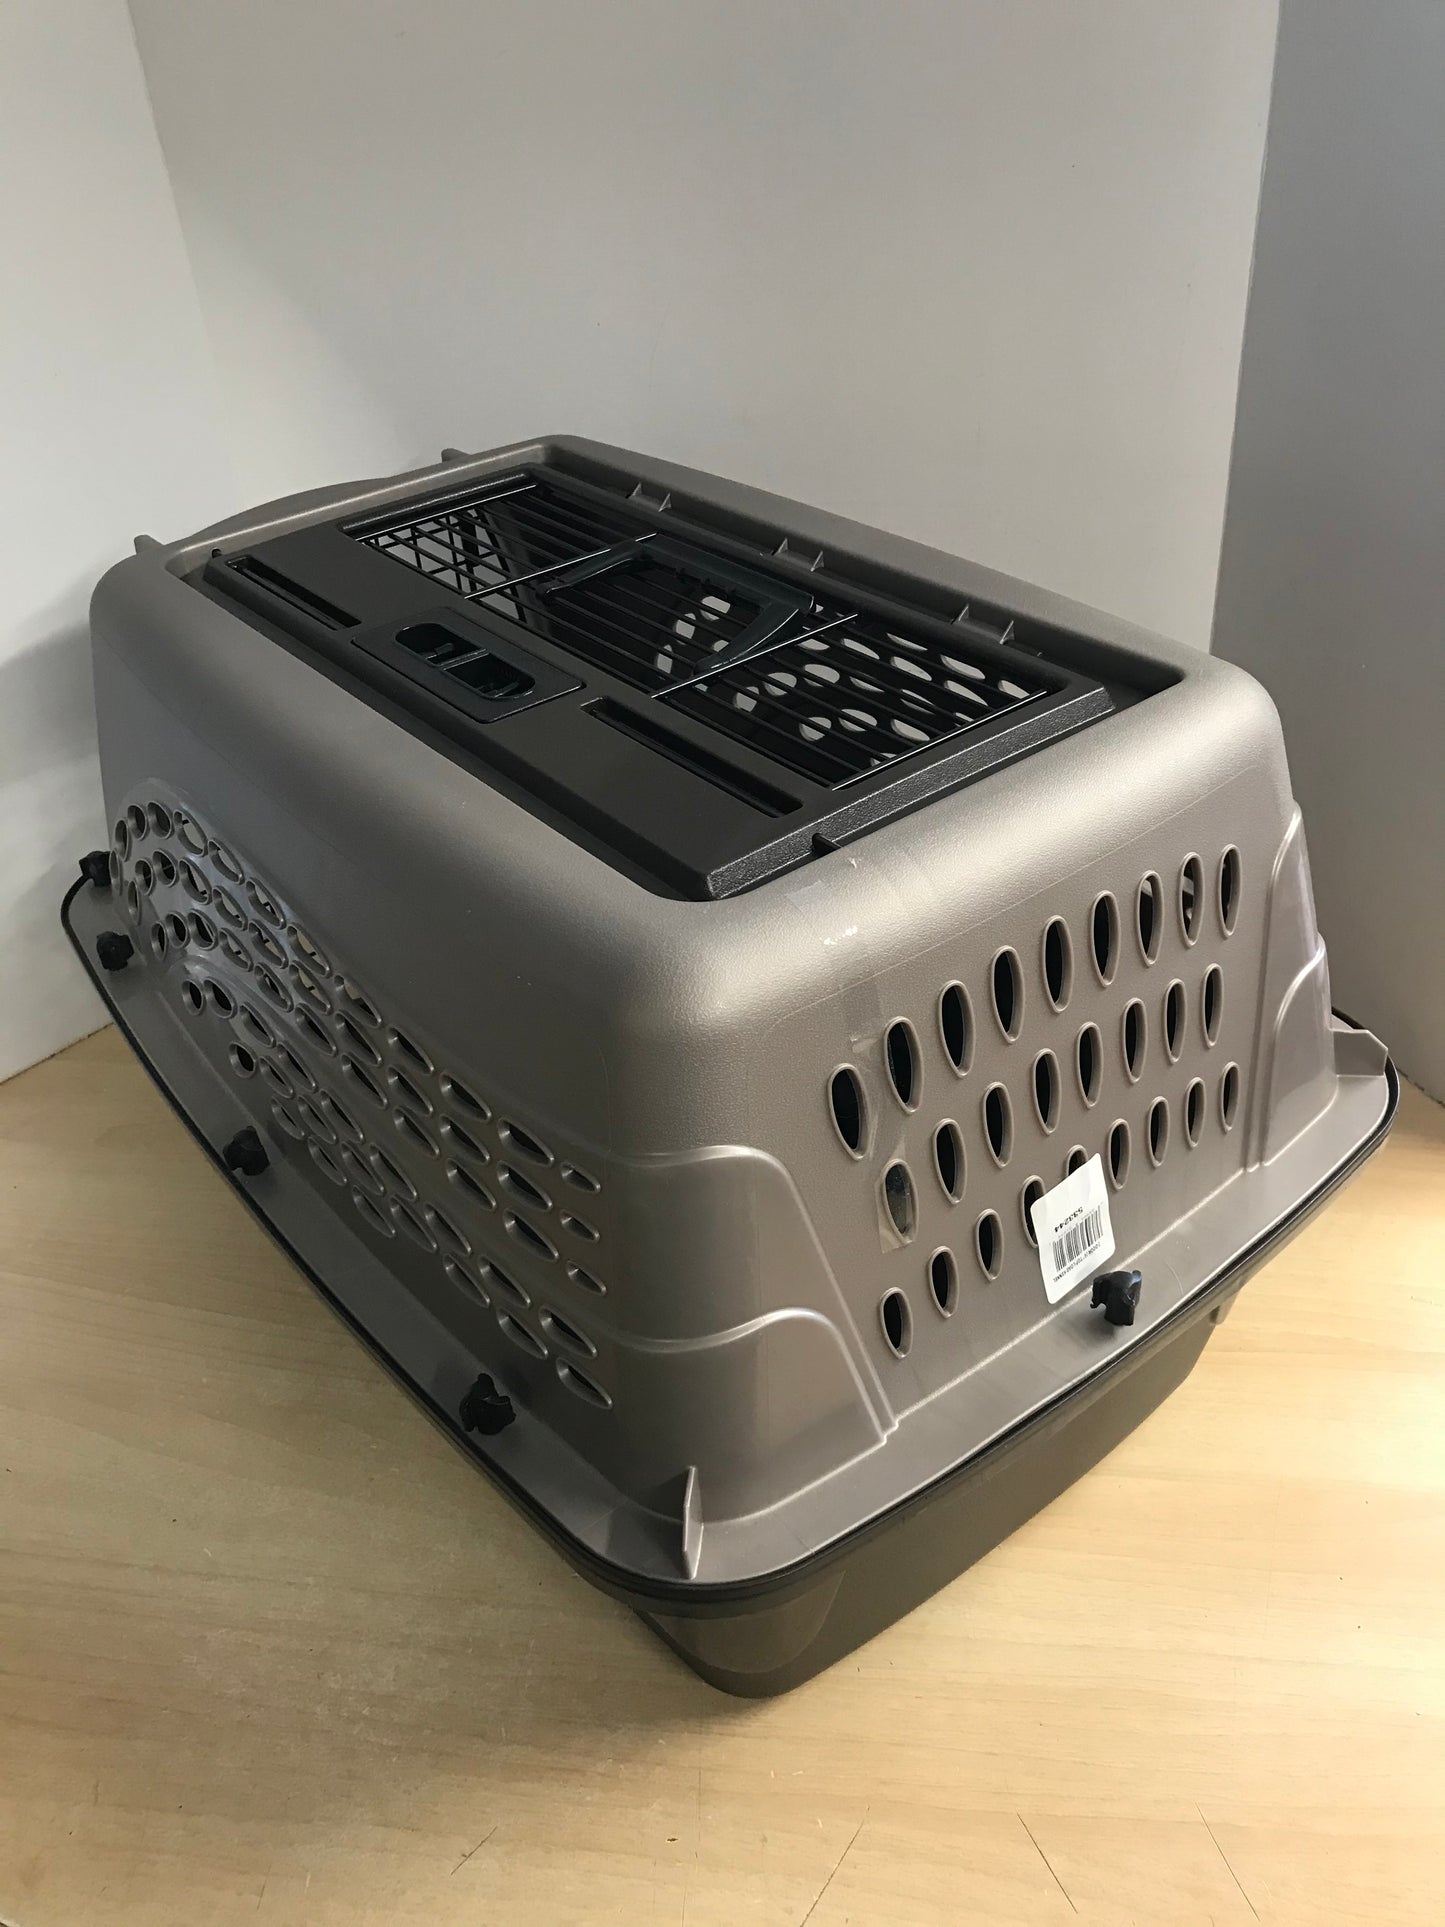 My Little Pet Shop Pet Puppy Cat Kennel Crate 2 Door With Top Load Light and Dark Brown 24 x 18 x 16 Up To 25 lb Excellent